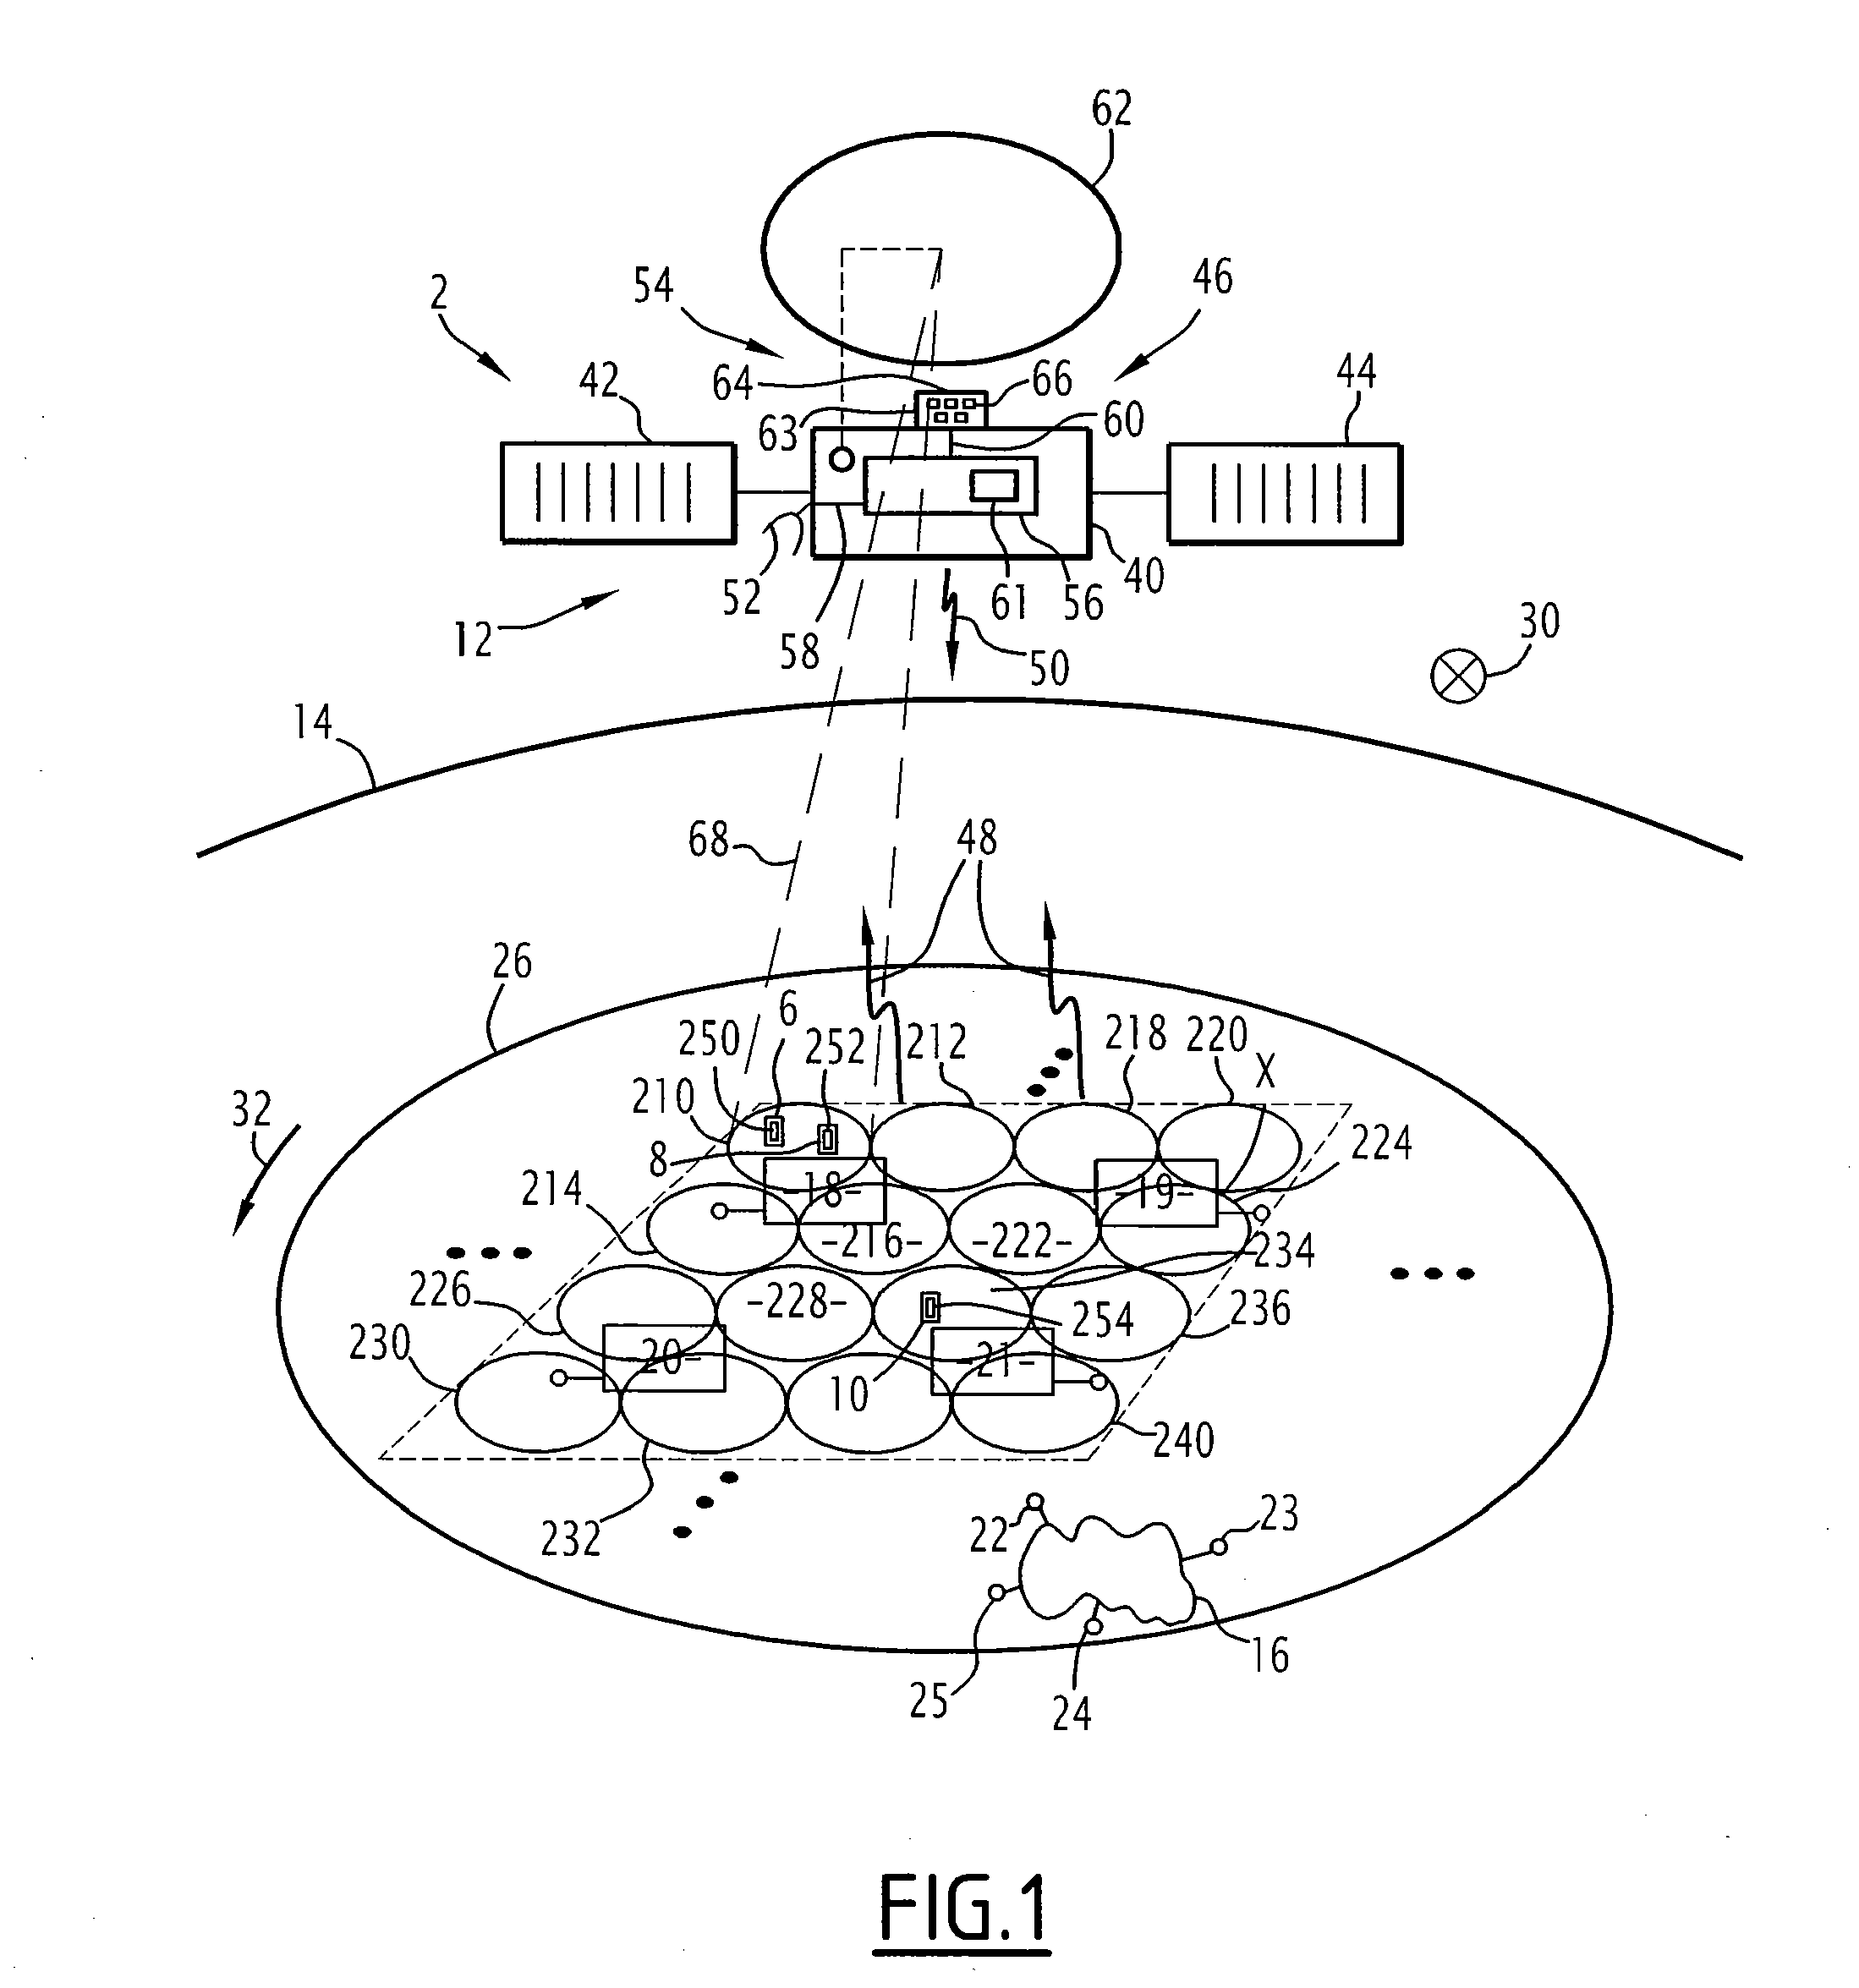 Multi-beam telecommunication antenna onboard a high-capacity satellite and related telecommunication system